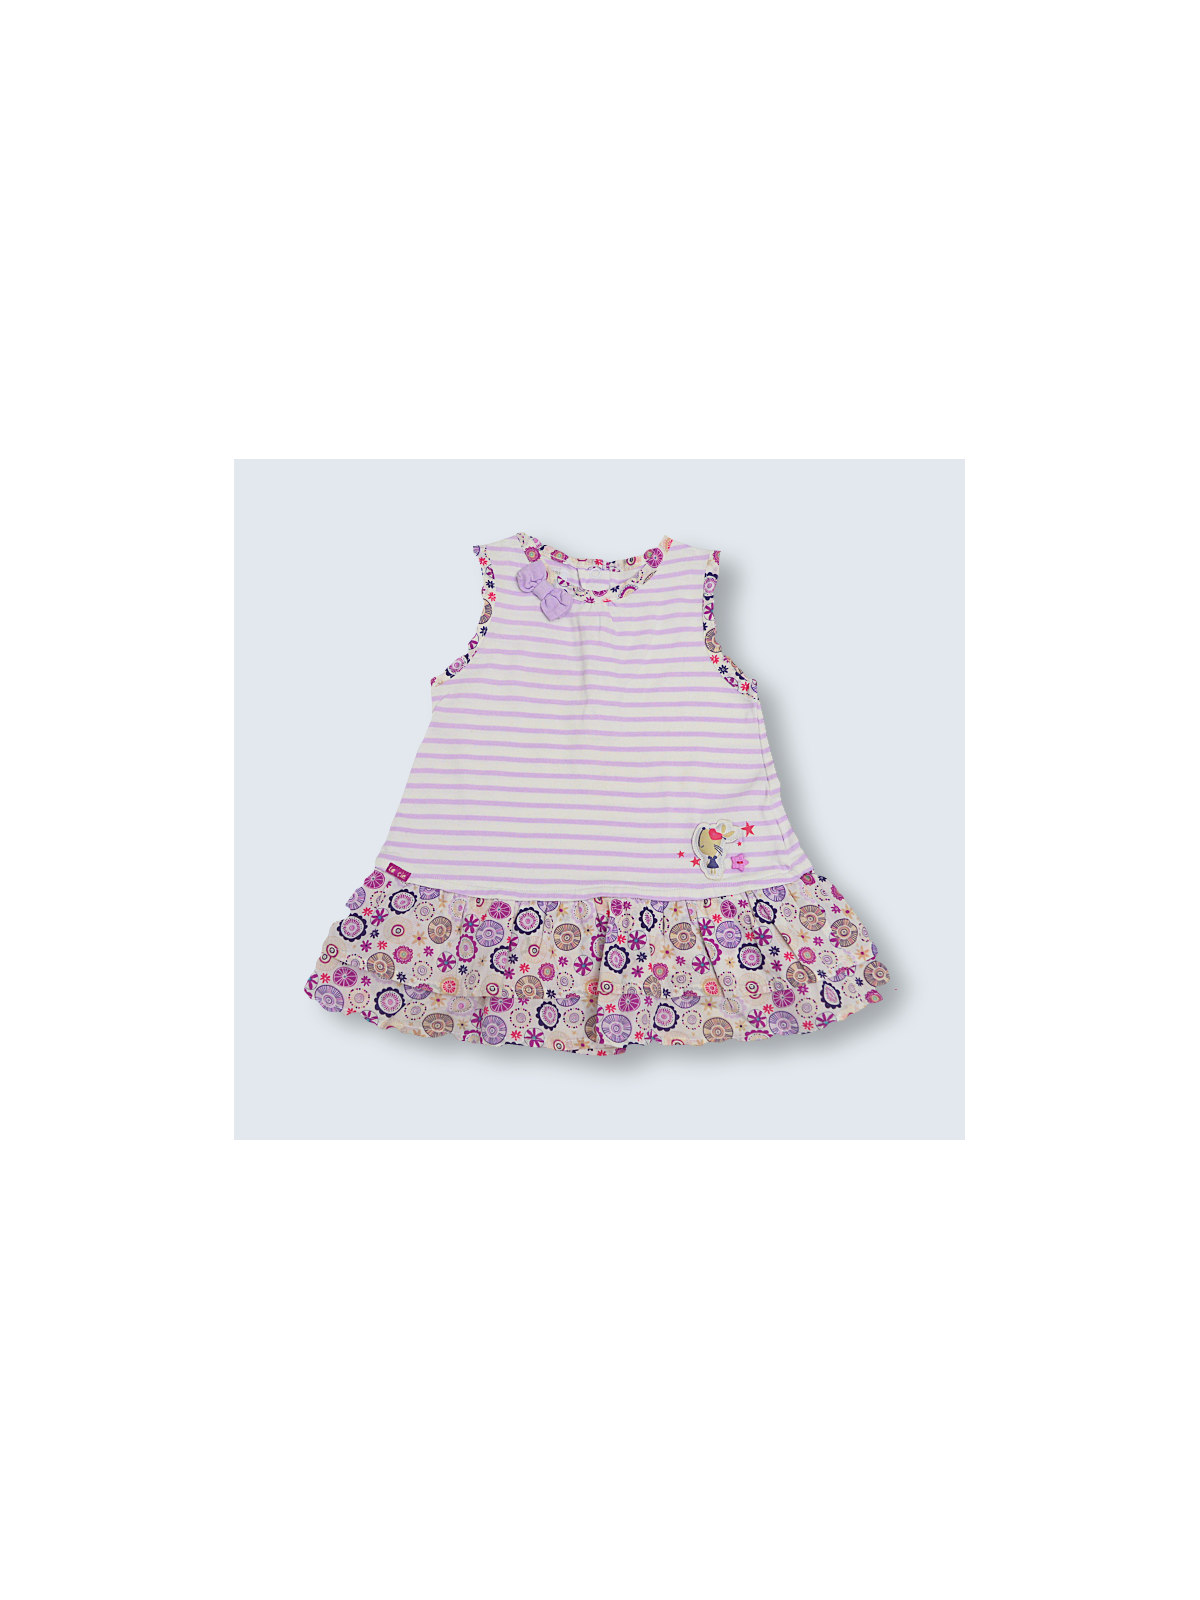 Robe d'occasion LCDP 12 Mois pour fille.